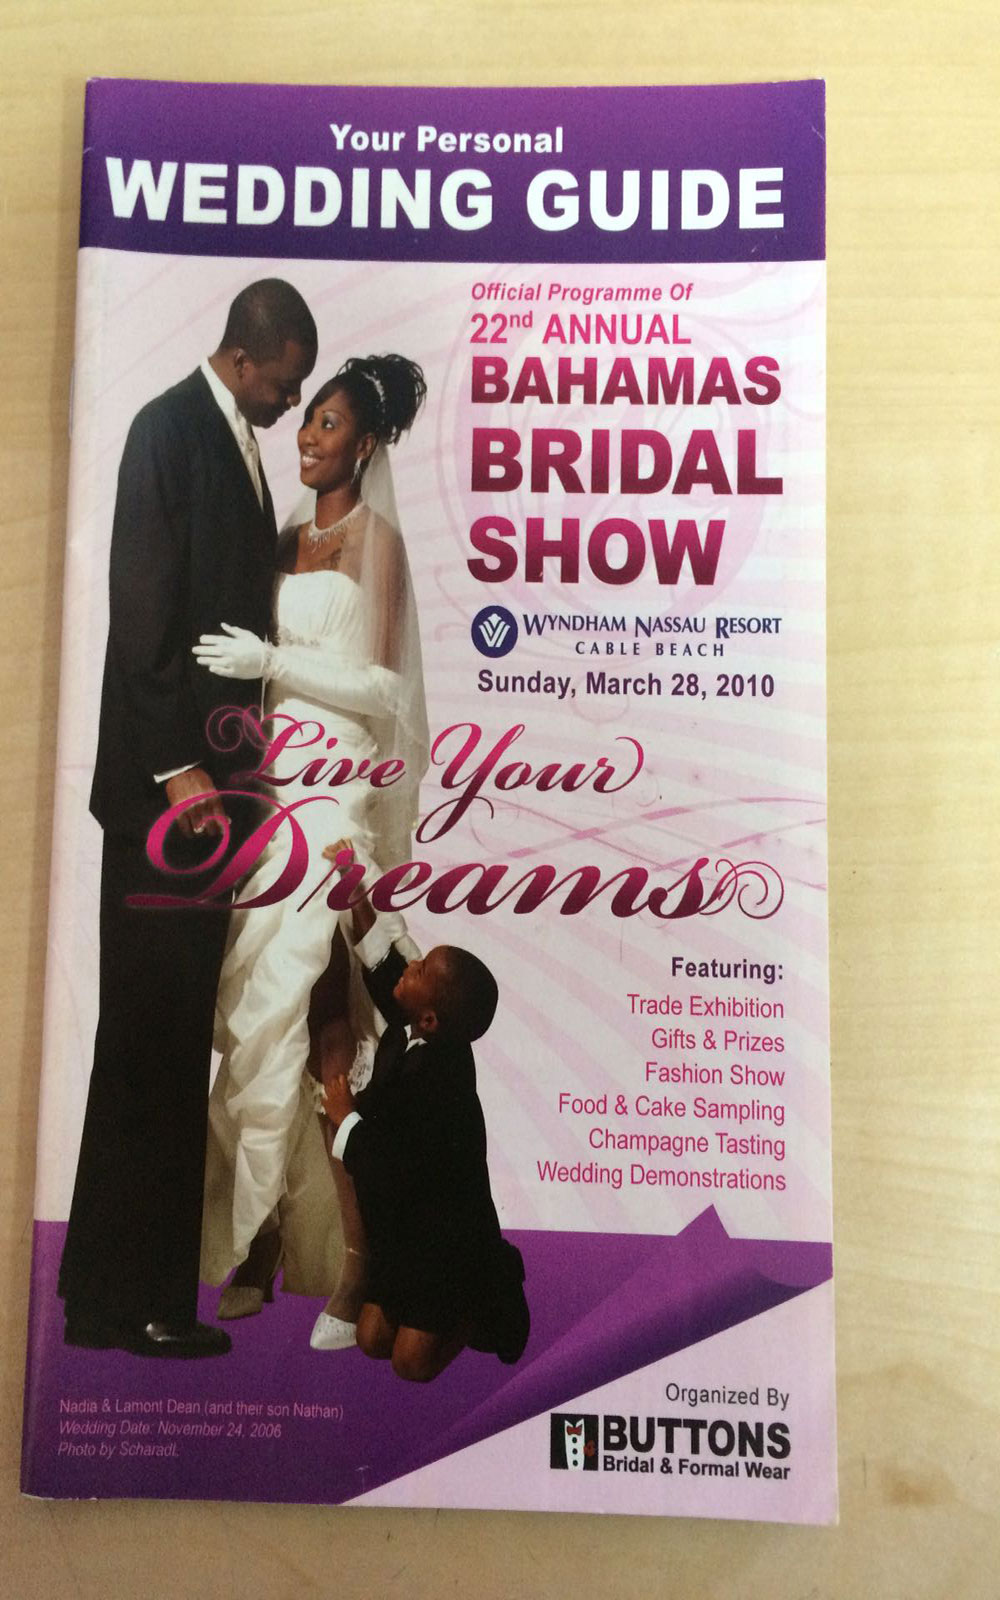 The Wedding Guide 2010